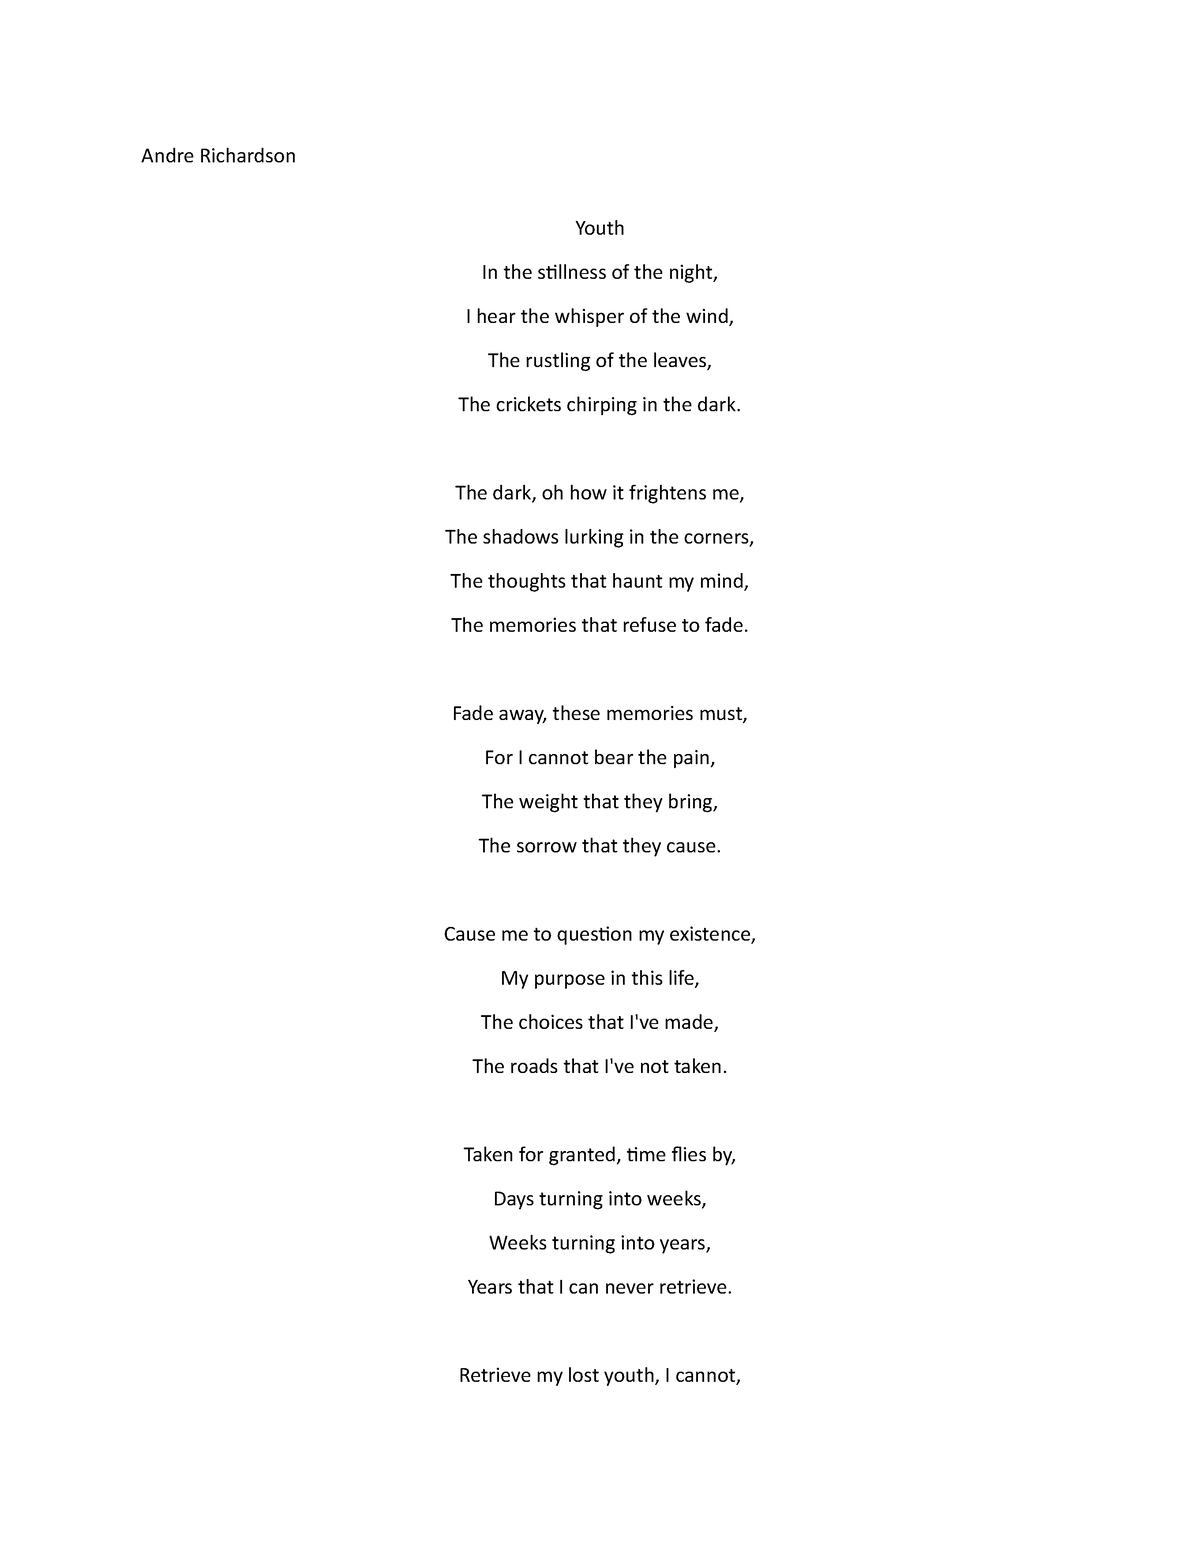 Youth Poem - A page long poem - Andre Richardson Youth In the stillness ...